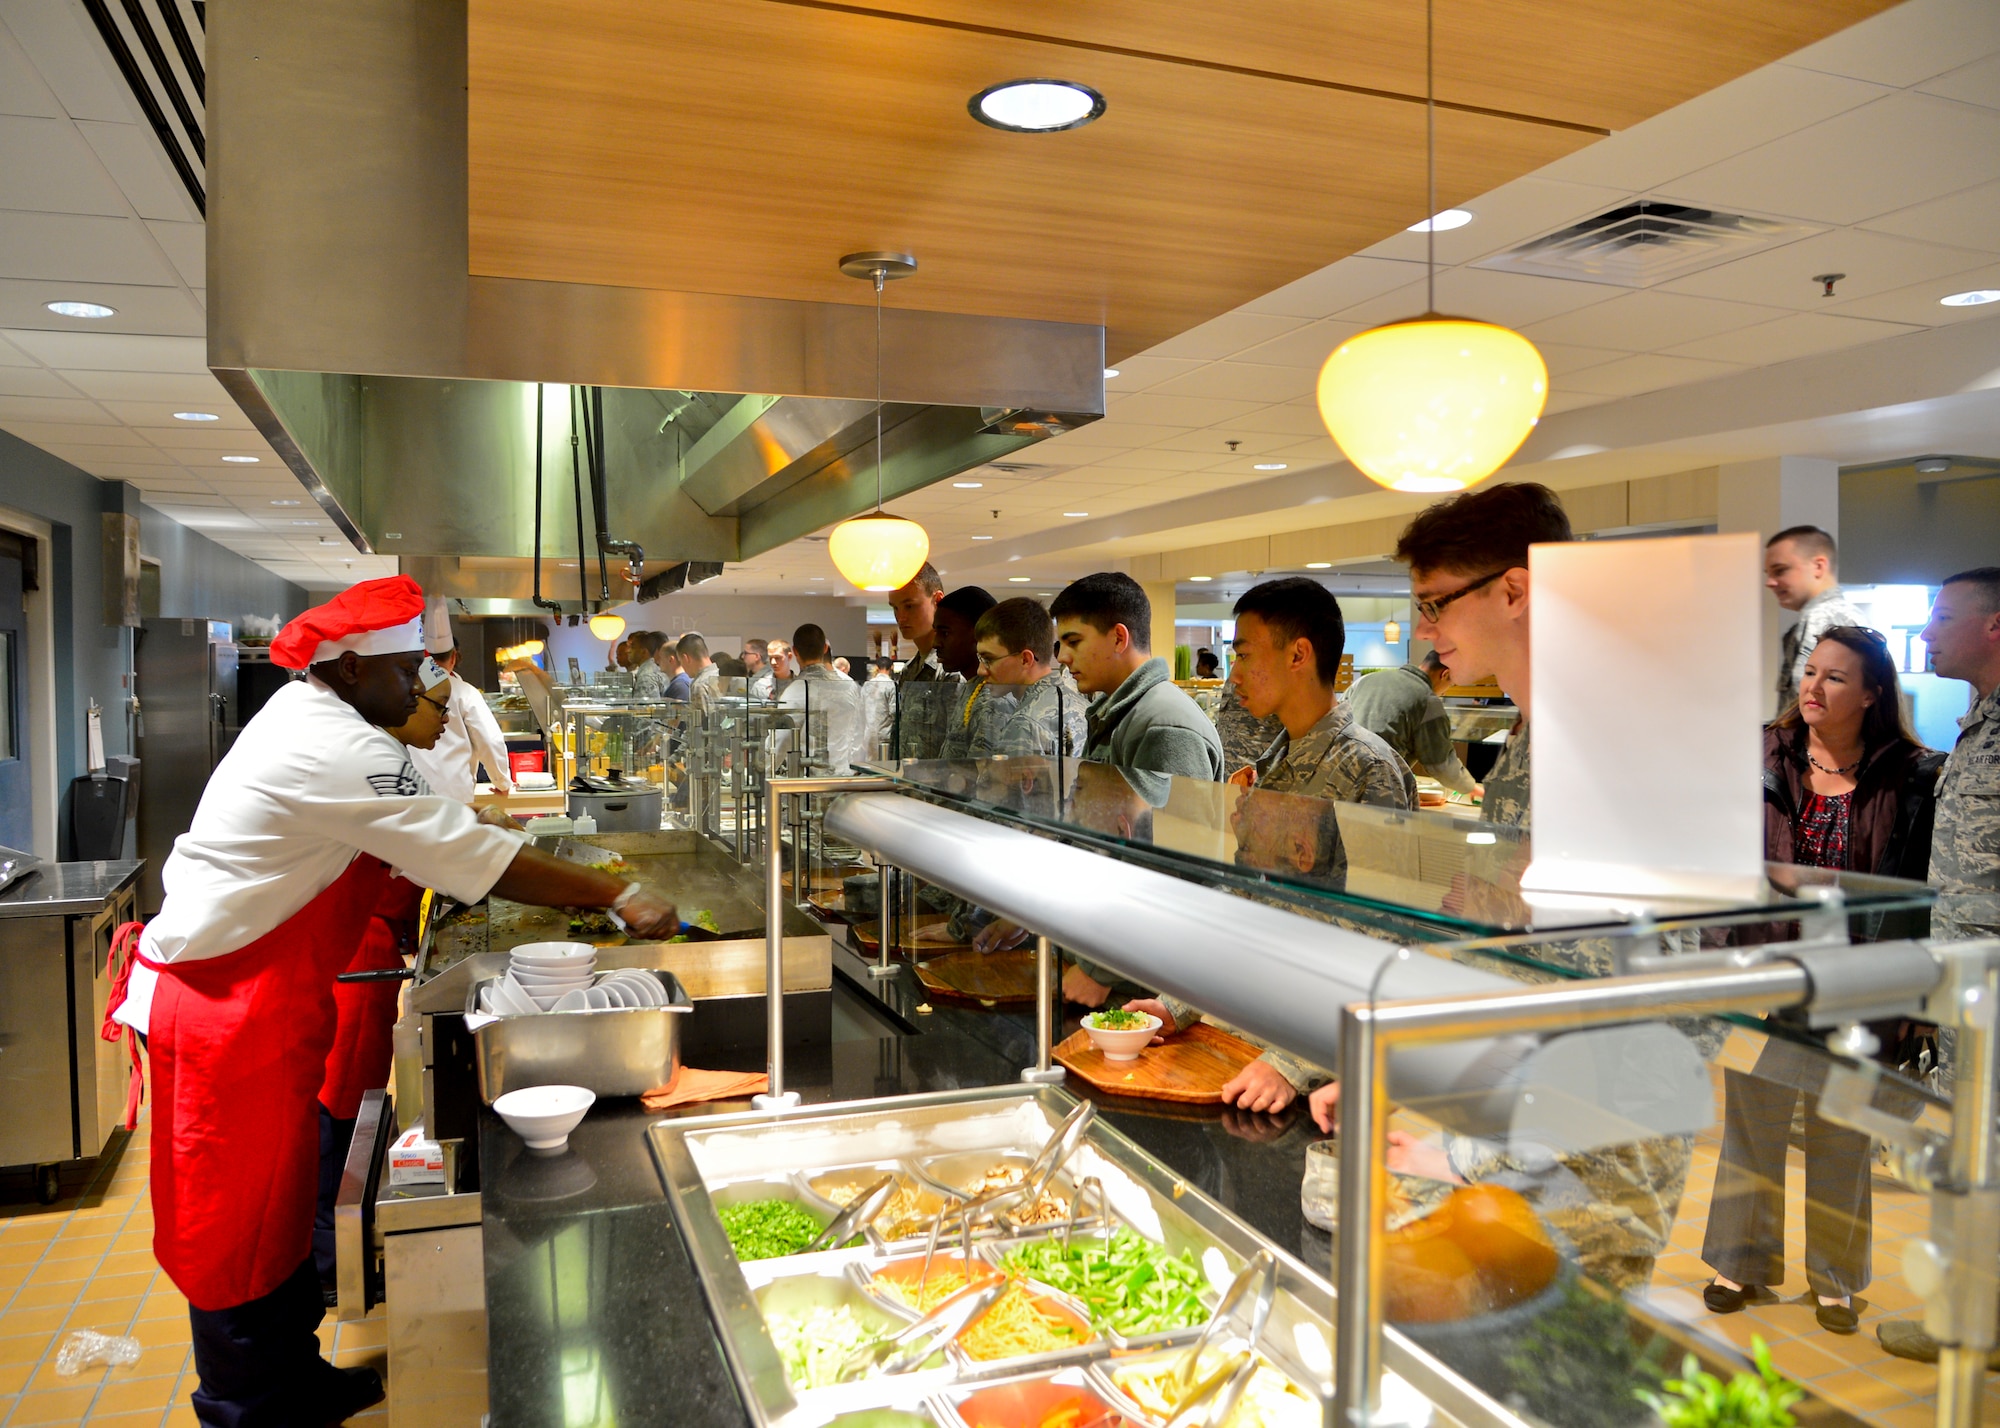 Tech. Sgt. Mark Obeng Duro, 436th Force Support Squadron food service section chief, and Staff Sgt. Jessica Williams, 436th FSS food service supervisor, operate the new Mongolian grill during the soft opening of the Patterson Dining Facility Nov. 17, 2015, at Dover Air Force Base, Del. The dining facility closed earlier this year to undergo improvements from the Air Force Food Transformation Initiative and now offers more, healthier options for dining customers. (U.S. Air Force photo/Senior Airman William Johnson)